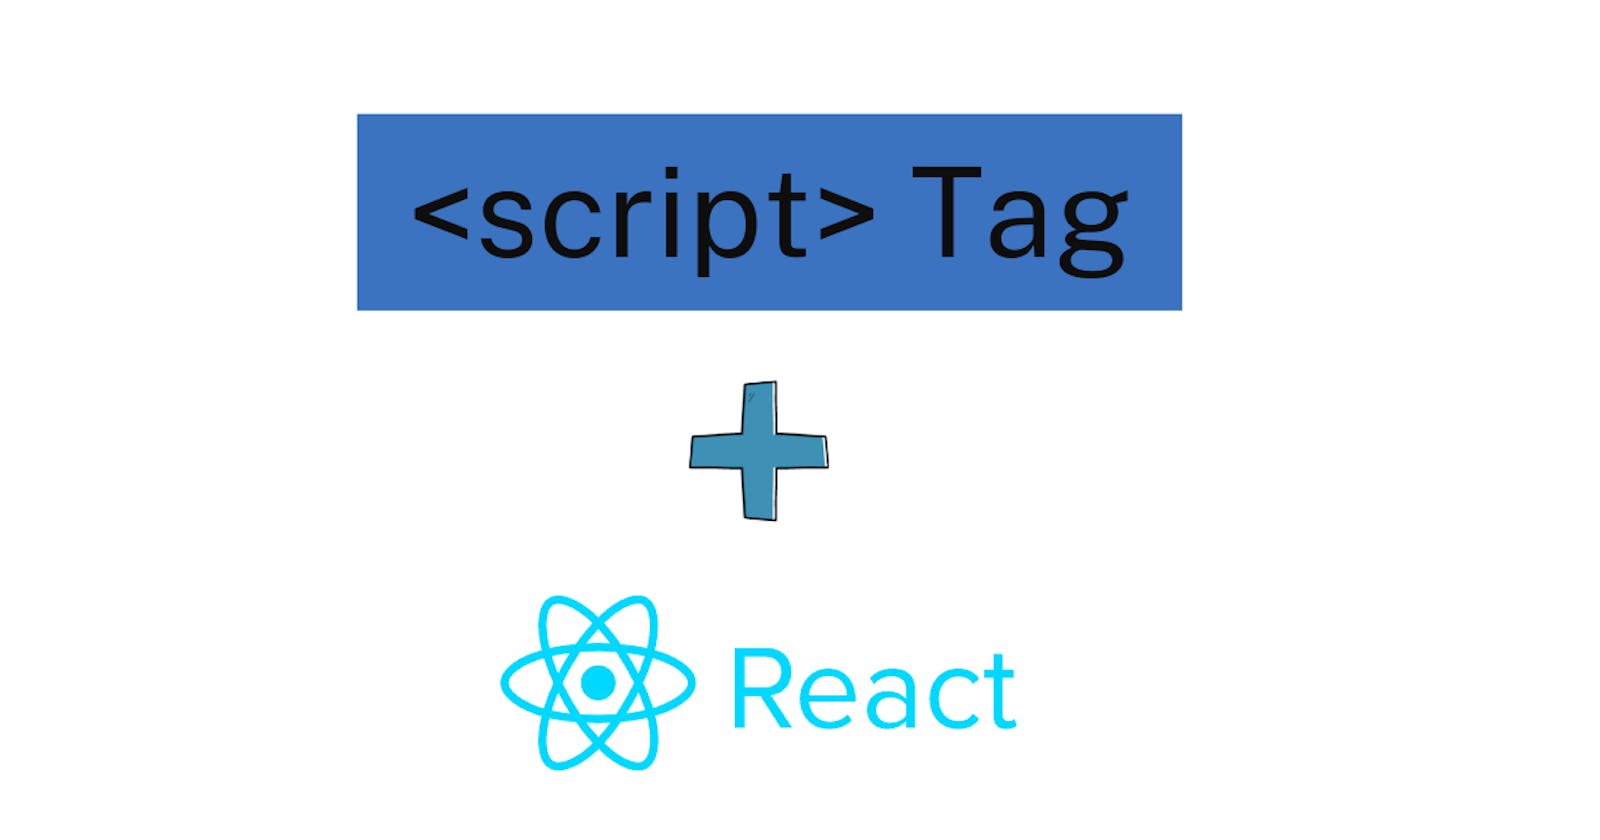 How to include Script Tag and fetch data from it in React